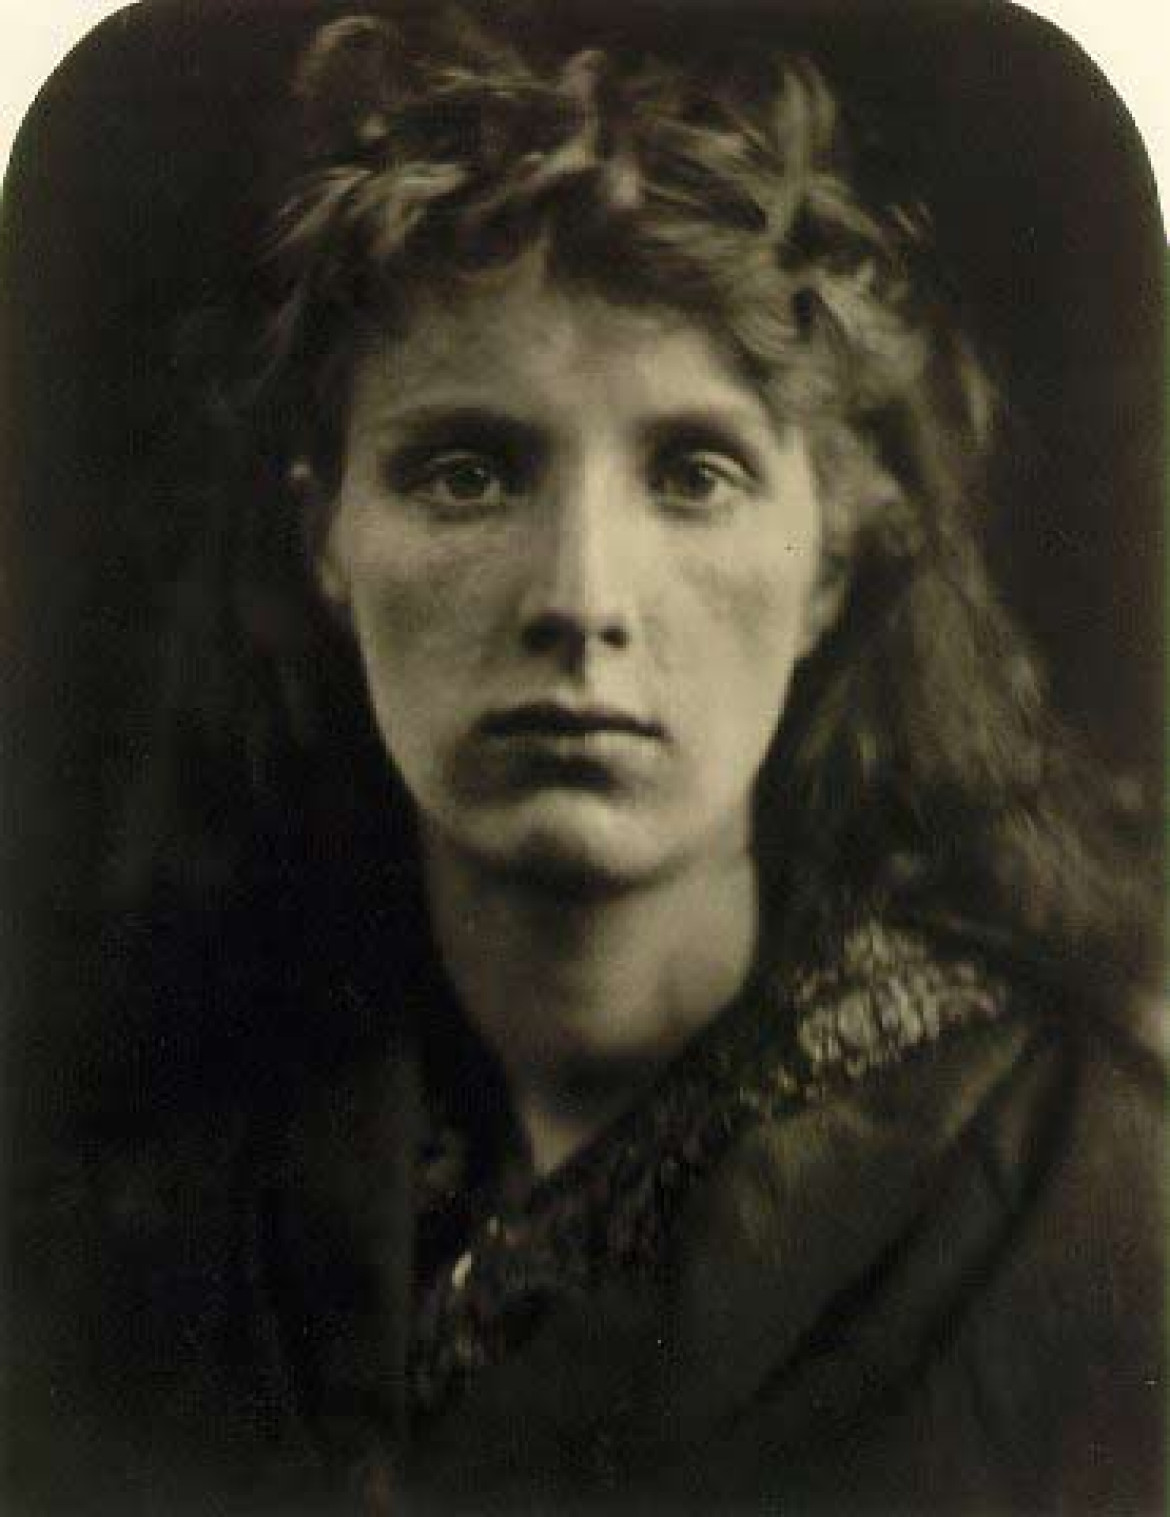 fot. Julia Margaret Cameron "The Mountain Nymph. Sweet Liberty" 1866 (www.masters-of-photography.com/)